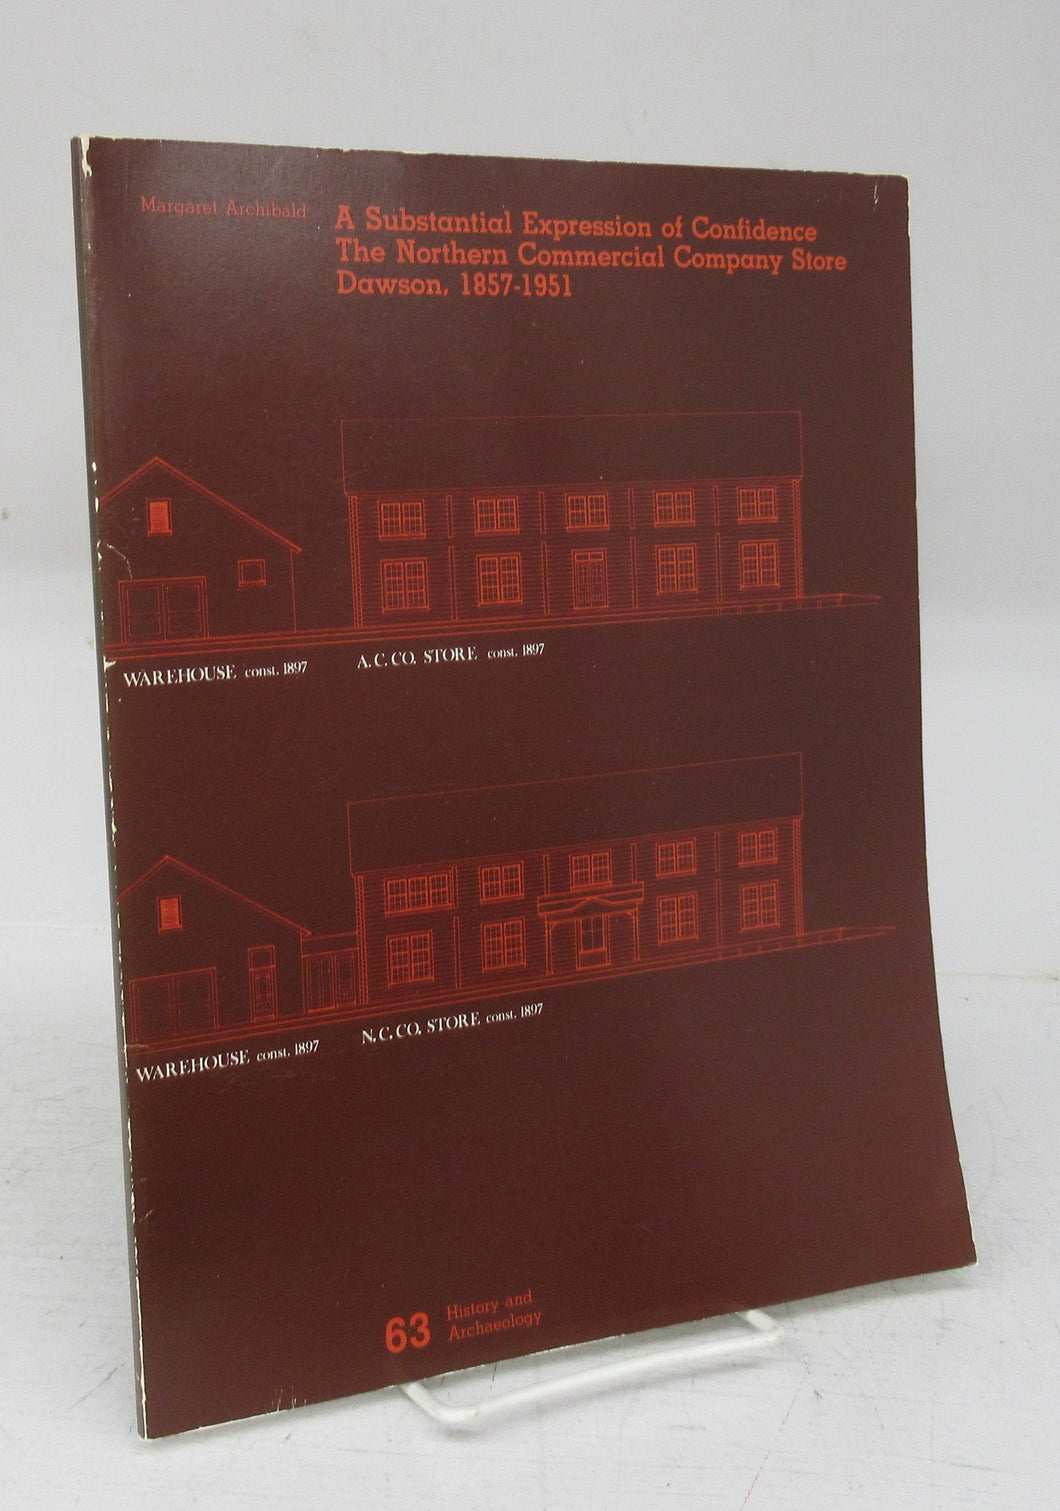 A Substantial Expression of Confidence: The Northern Commercial Company Store, Dawson 1857-1951